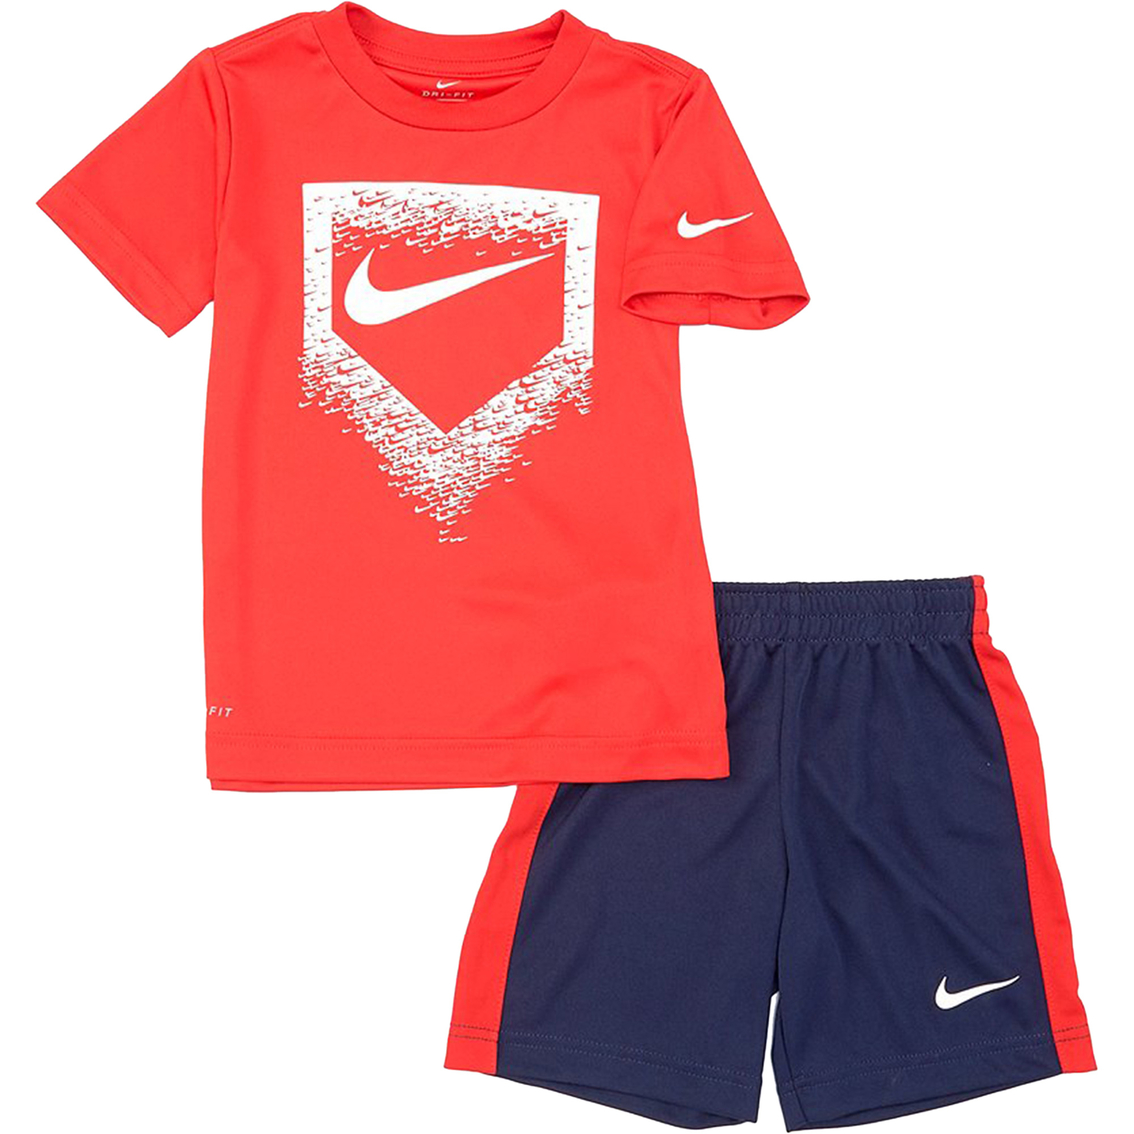 4t nike outfits boy